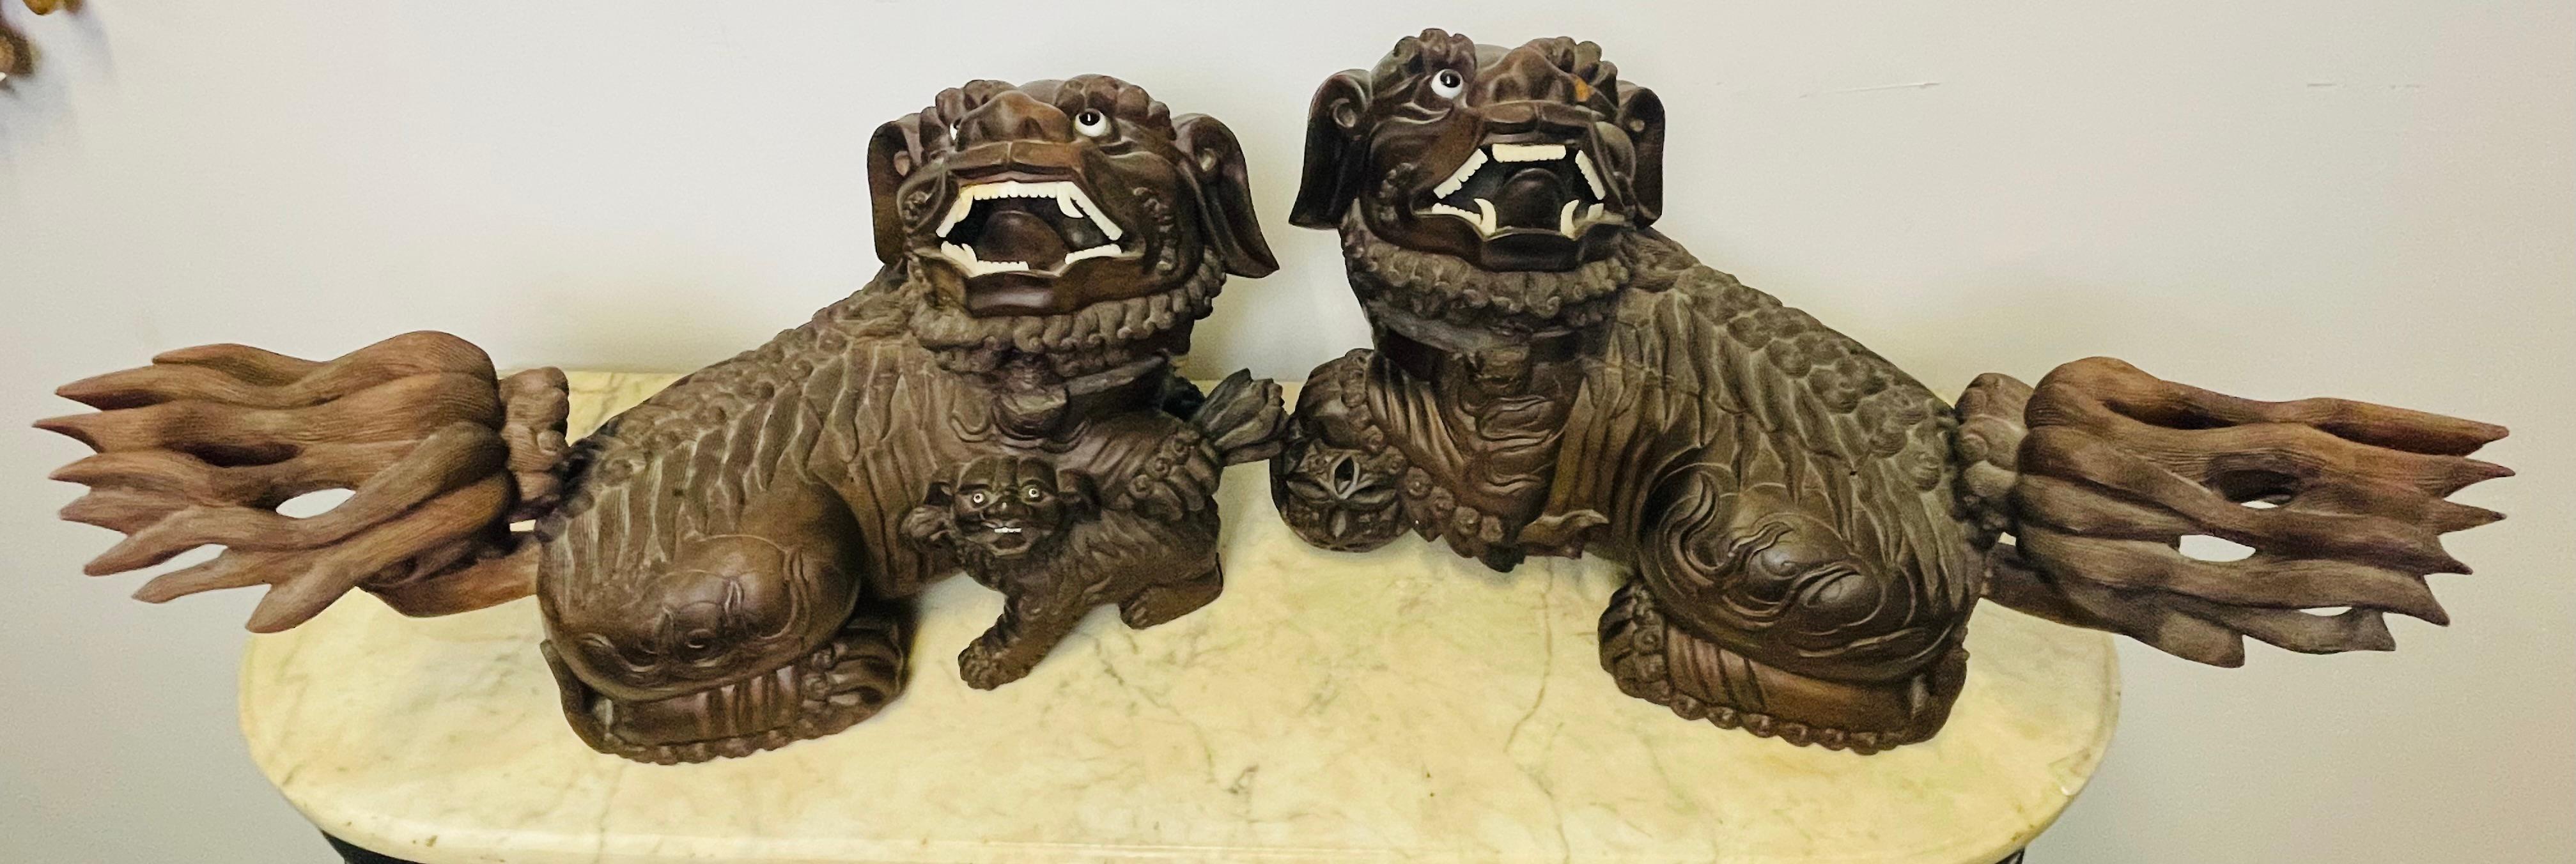 Pair of 18th/19th Century Solid Teak Foo Dogs, Opposing, Statuary For Sale 9